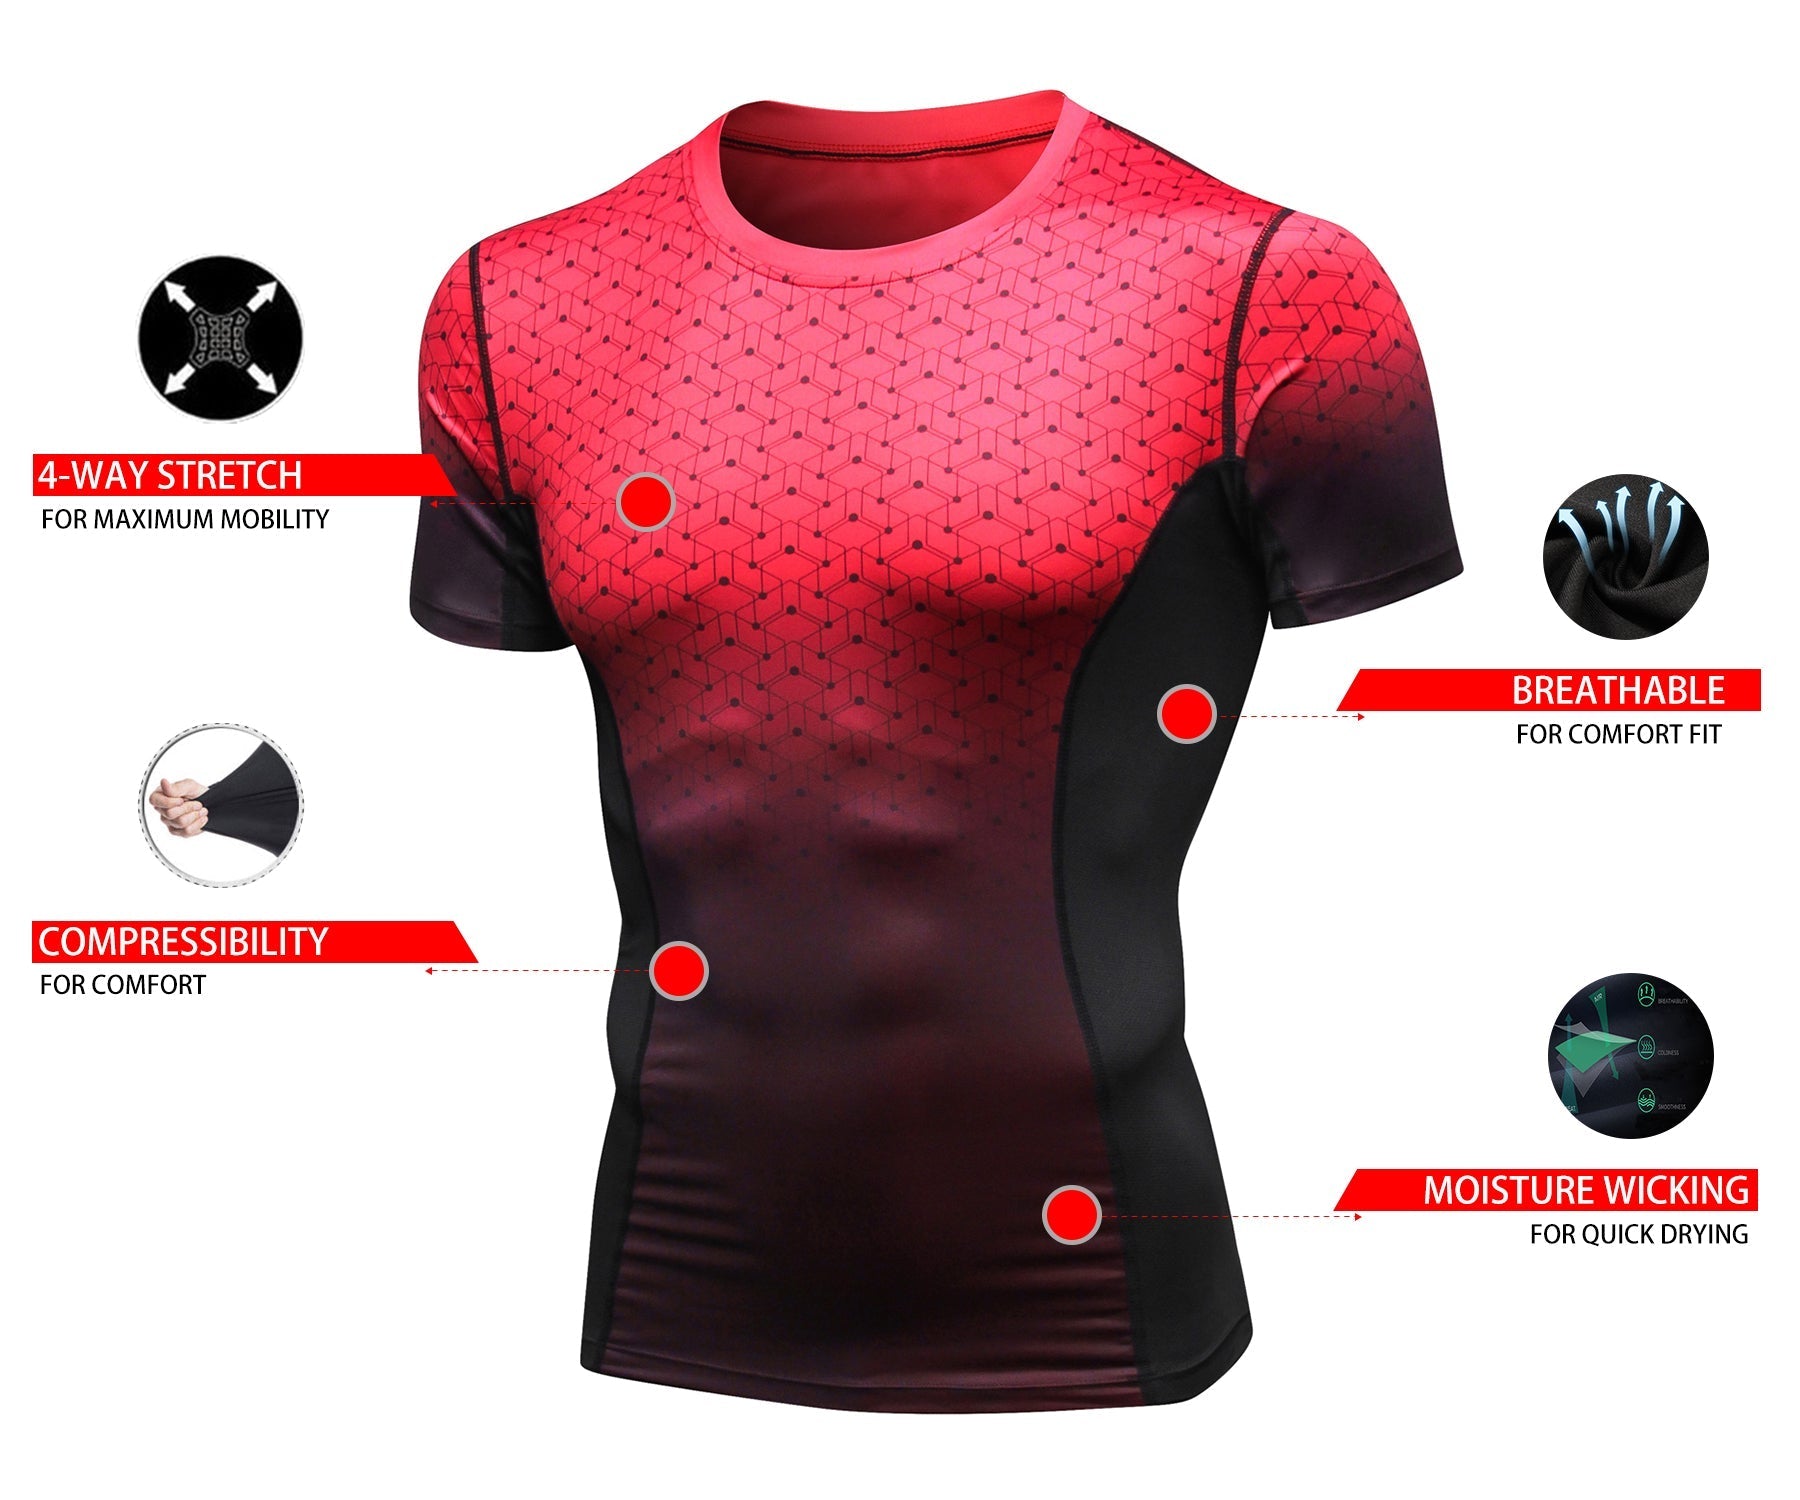 Mens Compression T-shirt Sports Workout Short Sleeve Shirts Grid Quick Dry Athletic Tops Fitness Active Gym Baselayer LANBAOSI